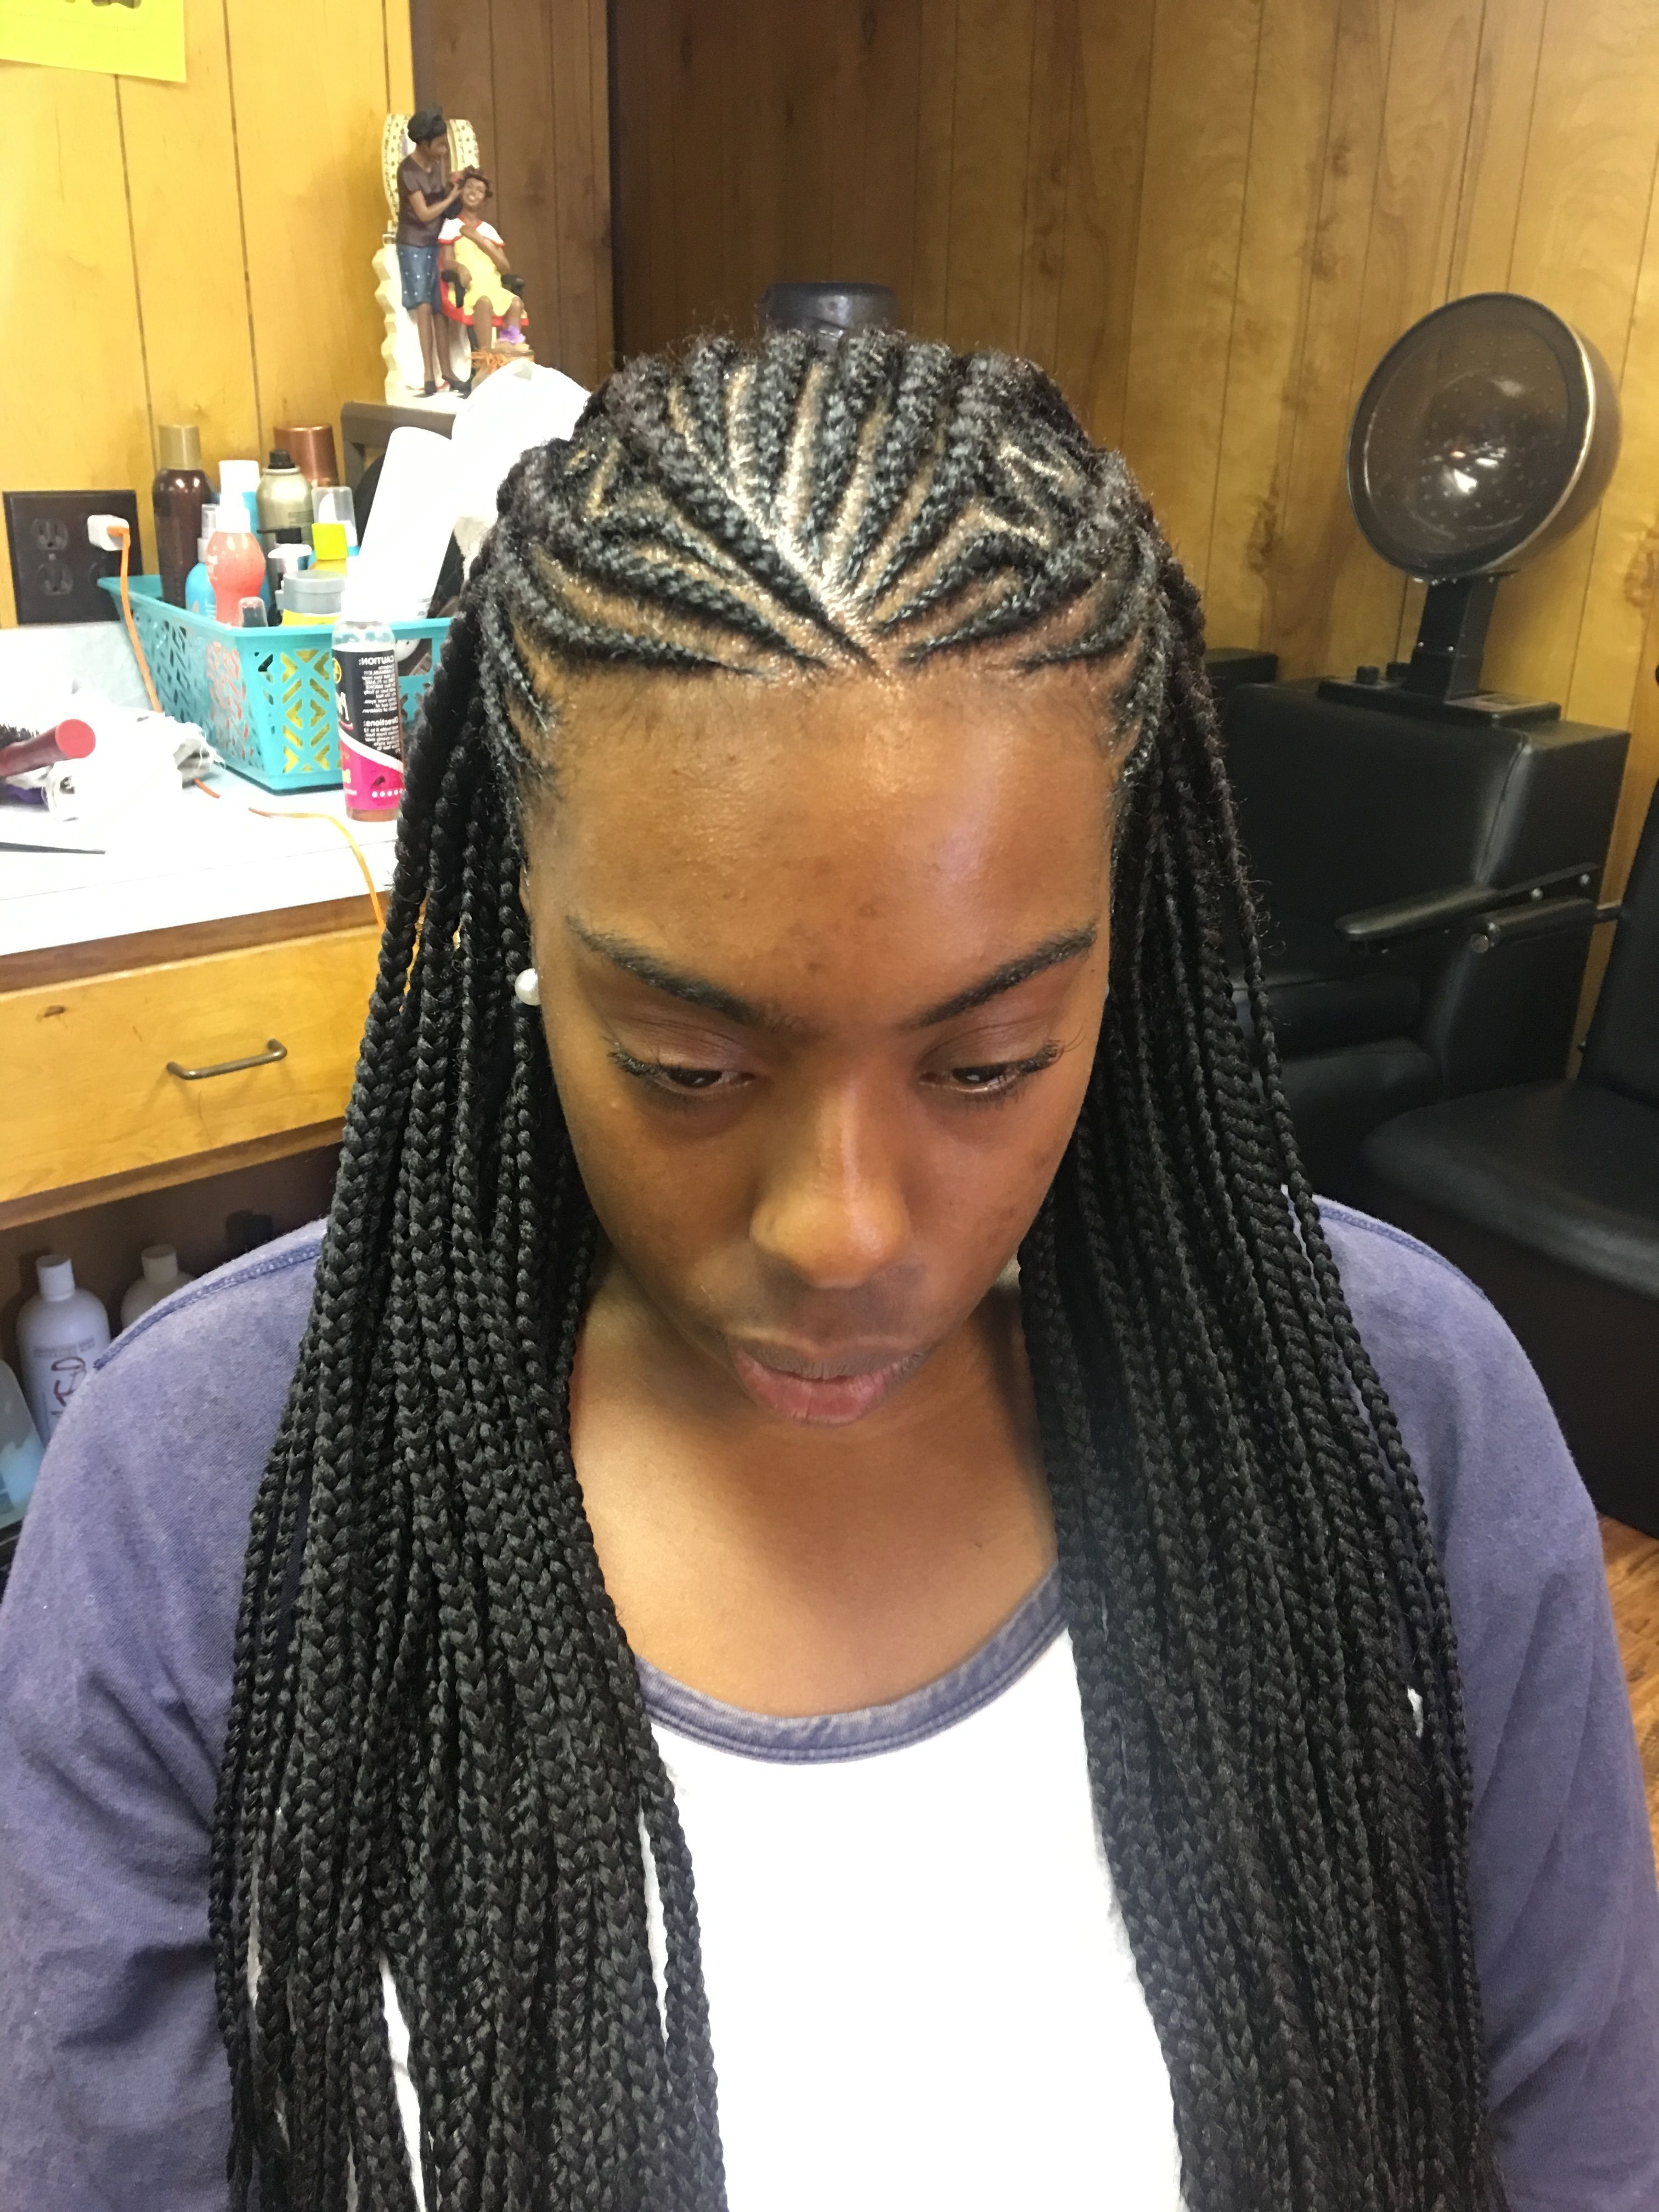 Best And Newest Ethiopian Cornrows Hairstyles Regarding Tribal Braids (feed In) Minus The Beads With Box Braids In The Back (View 14 of 15)